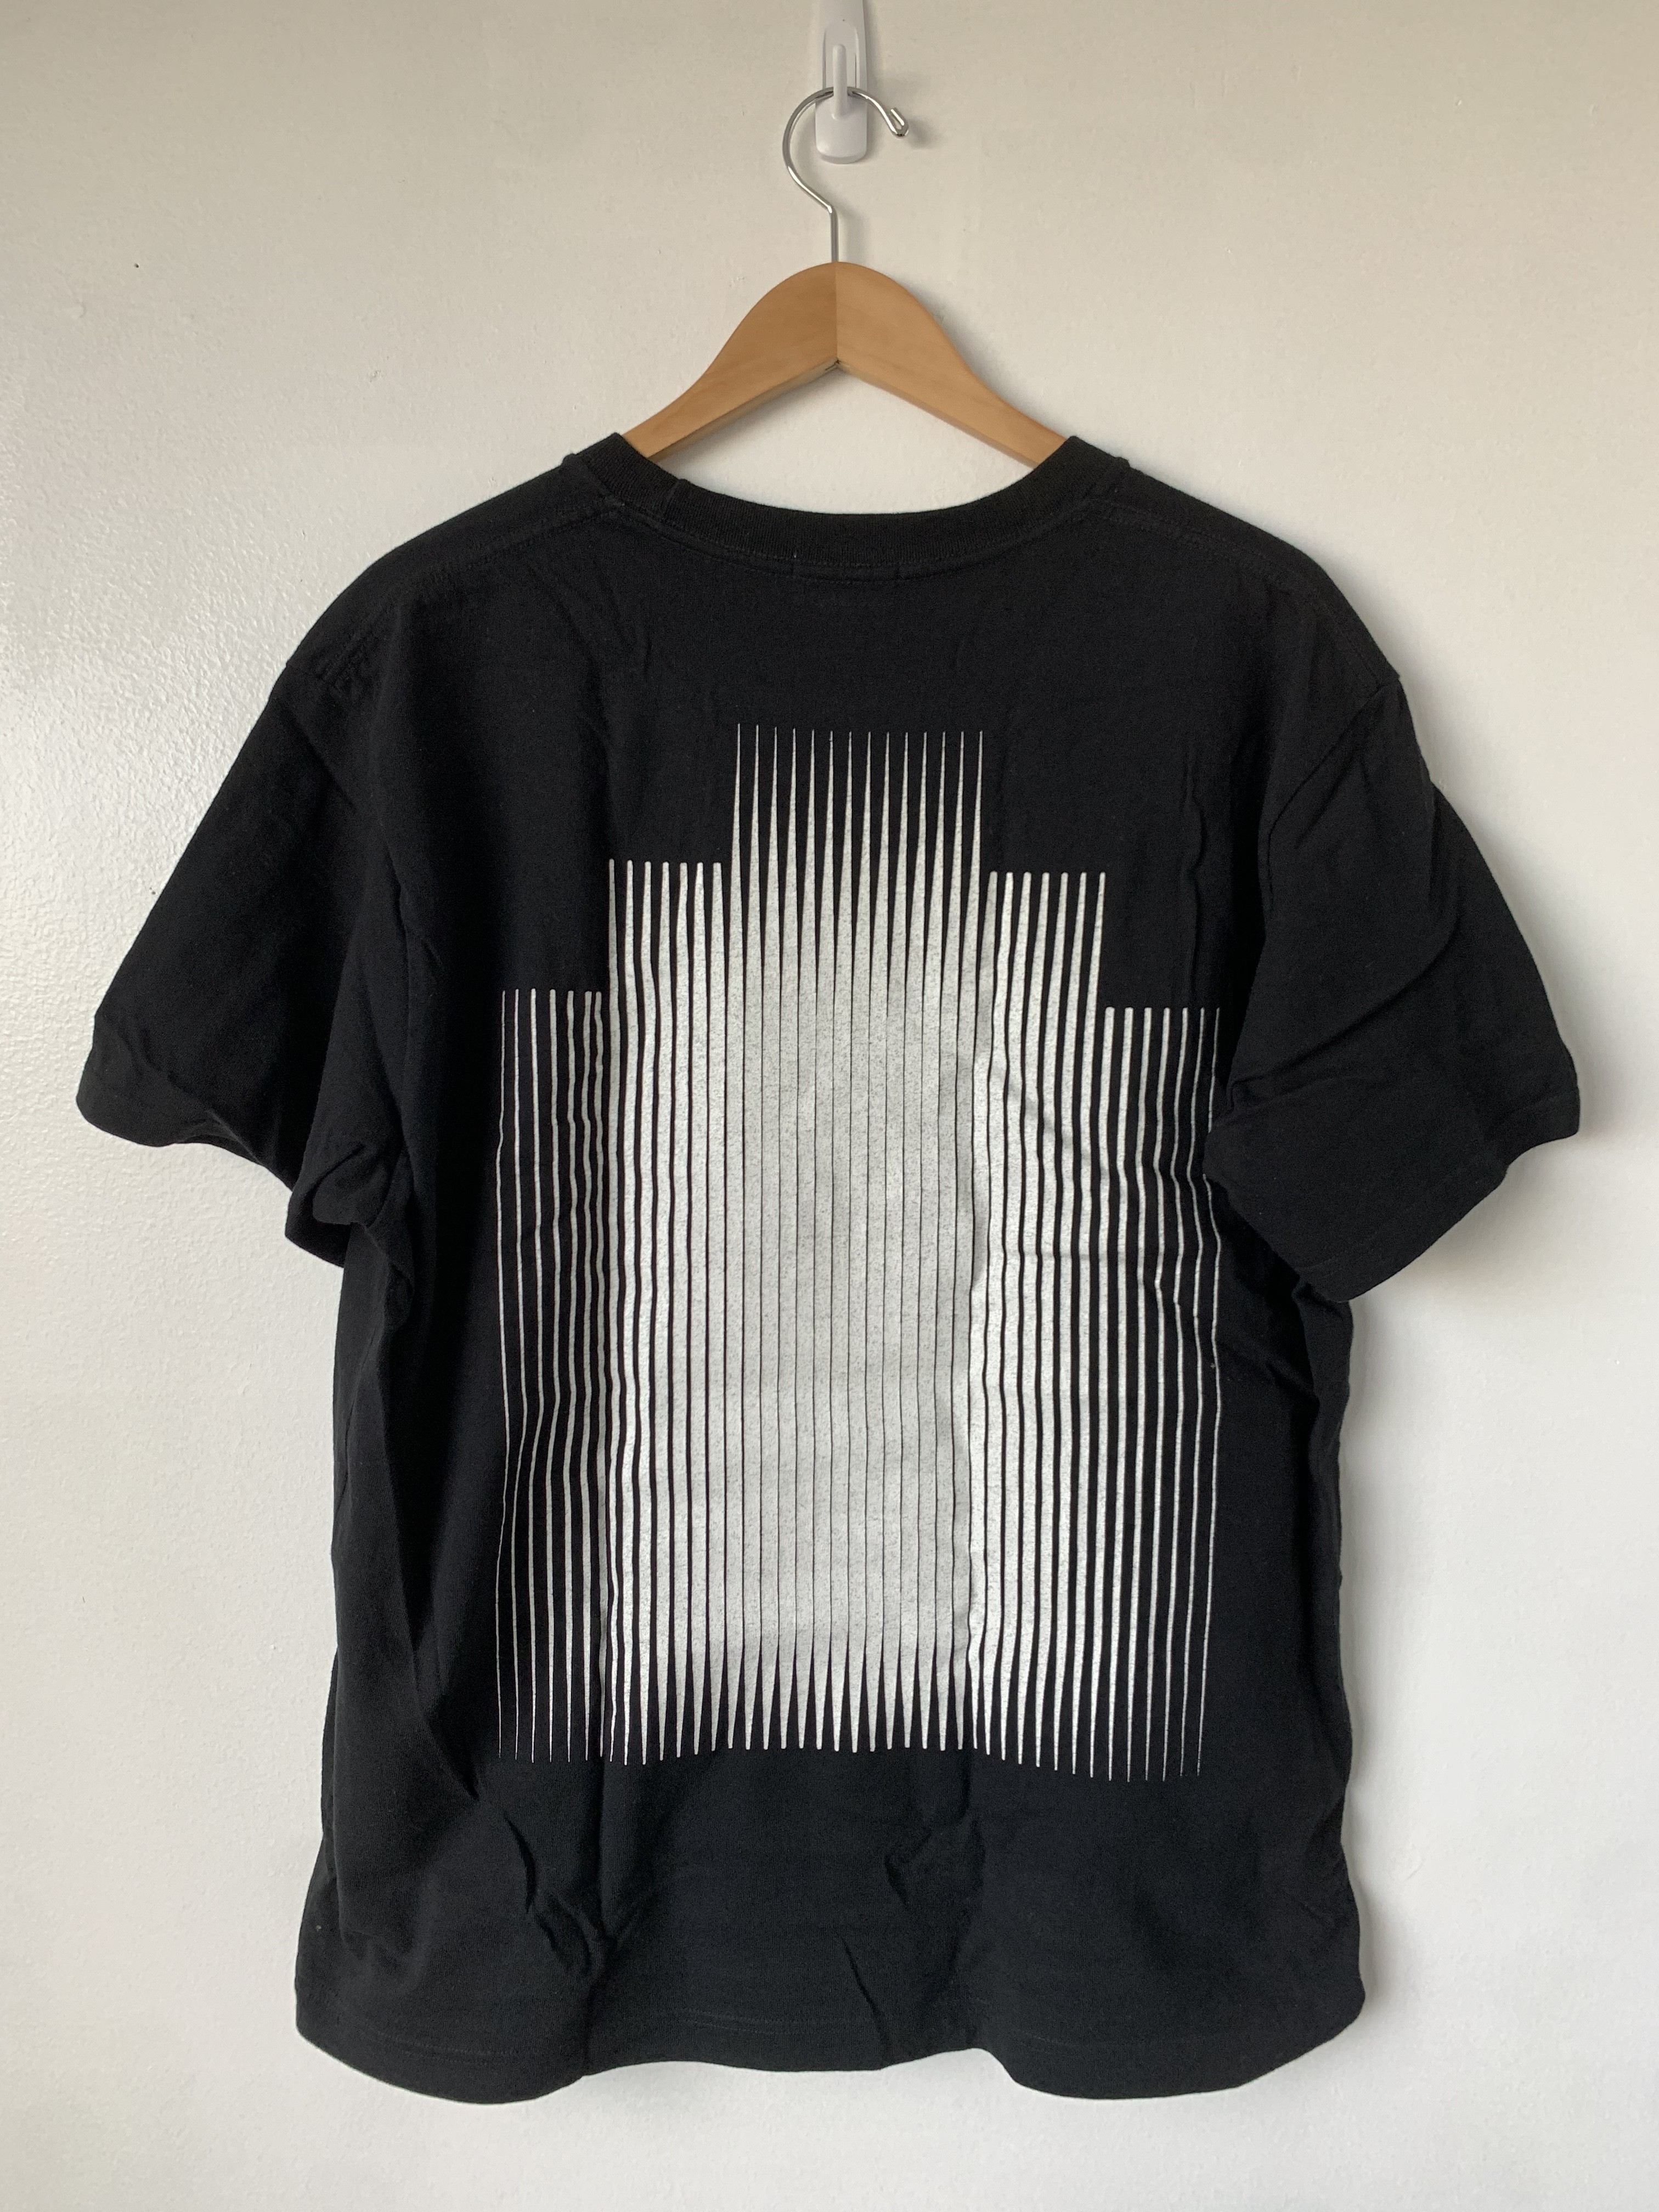 Pursuit of Form Tee - 2